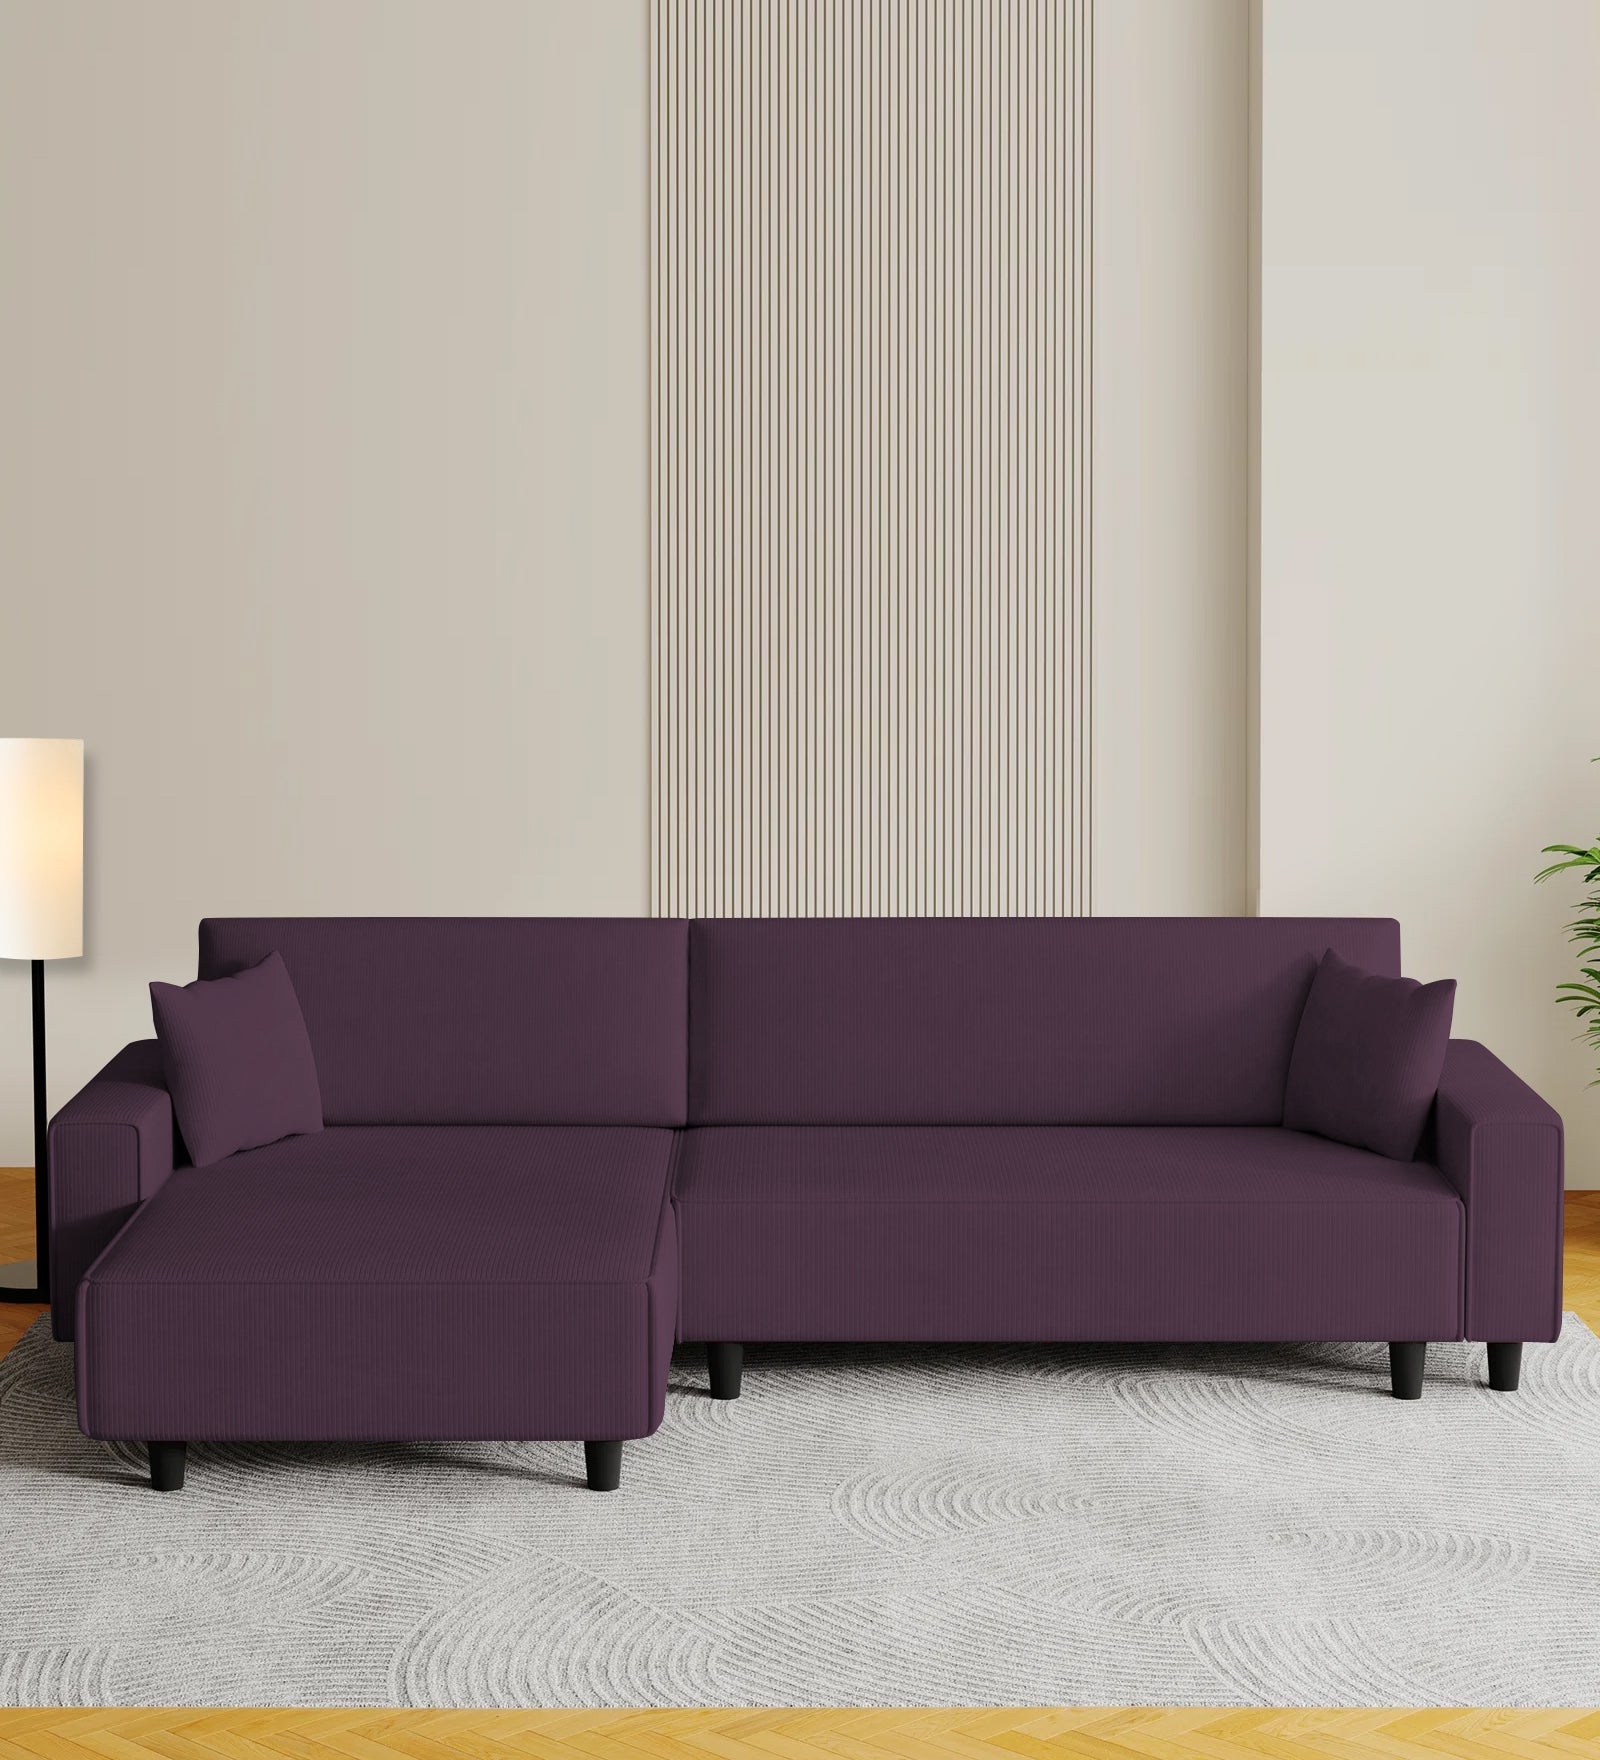 Peach Fabric RHS 6 Seater Sectional Sofa Cum Bed With Storage In Greek Purple Colour